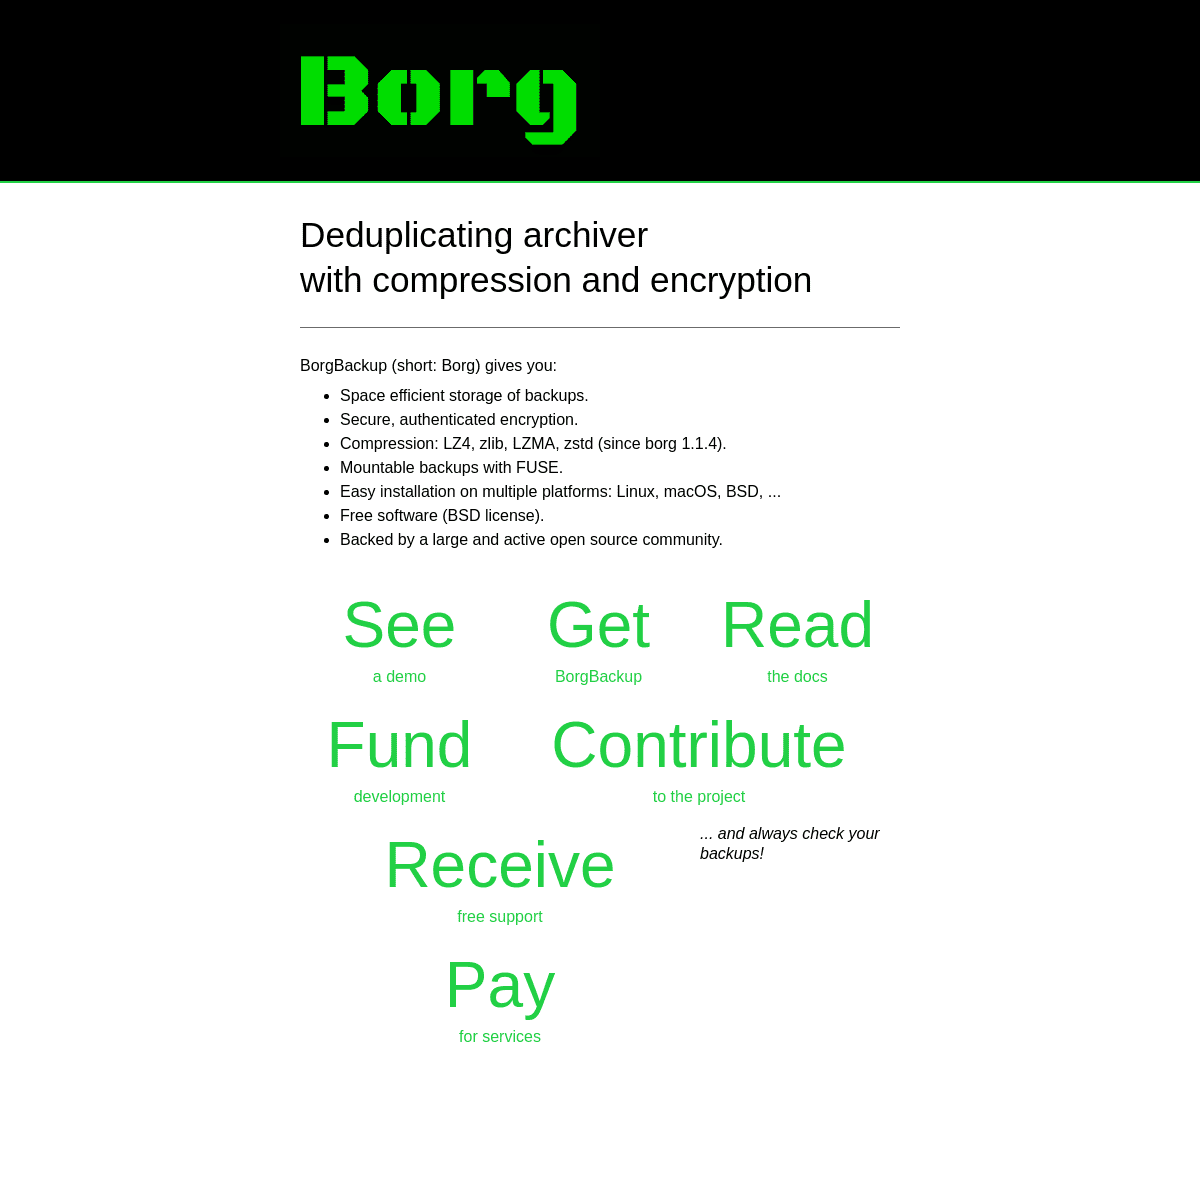 A complete backup of borgbackup.org